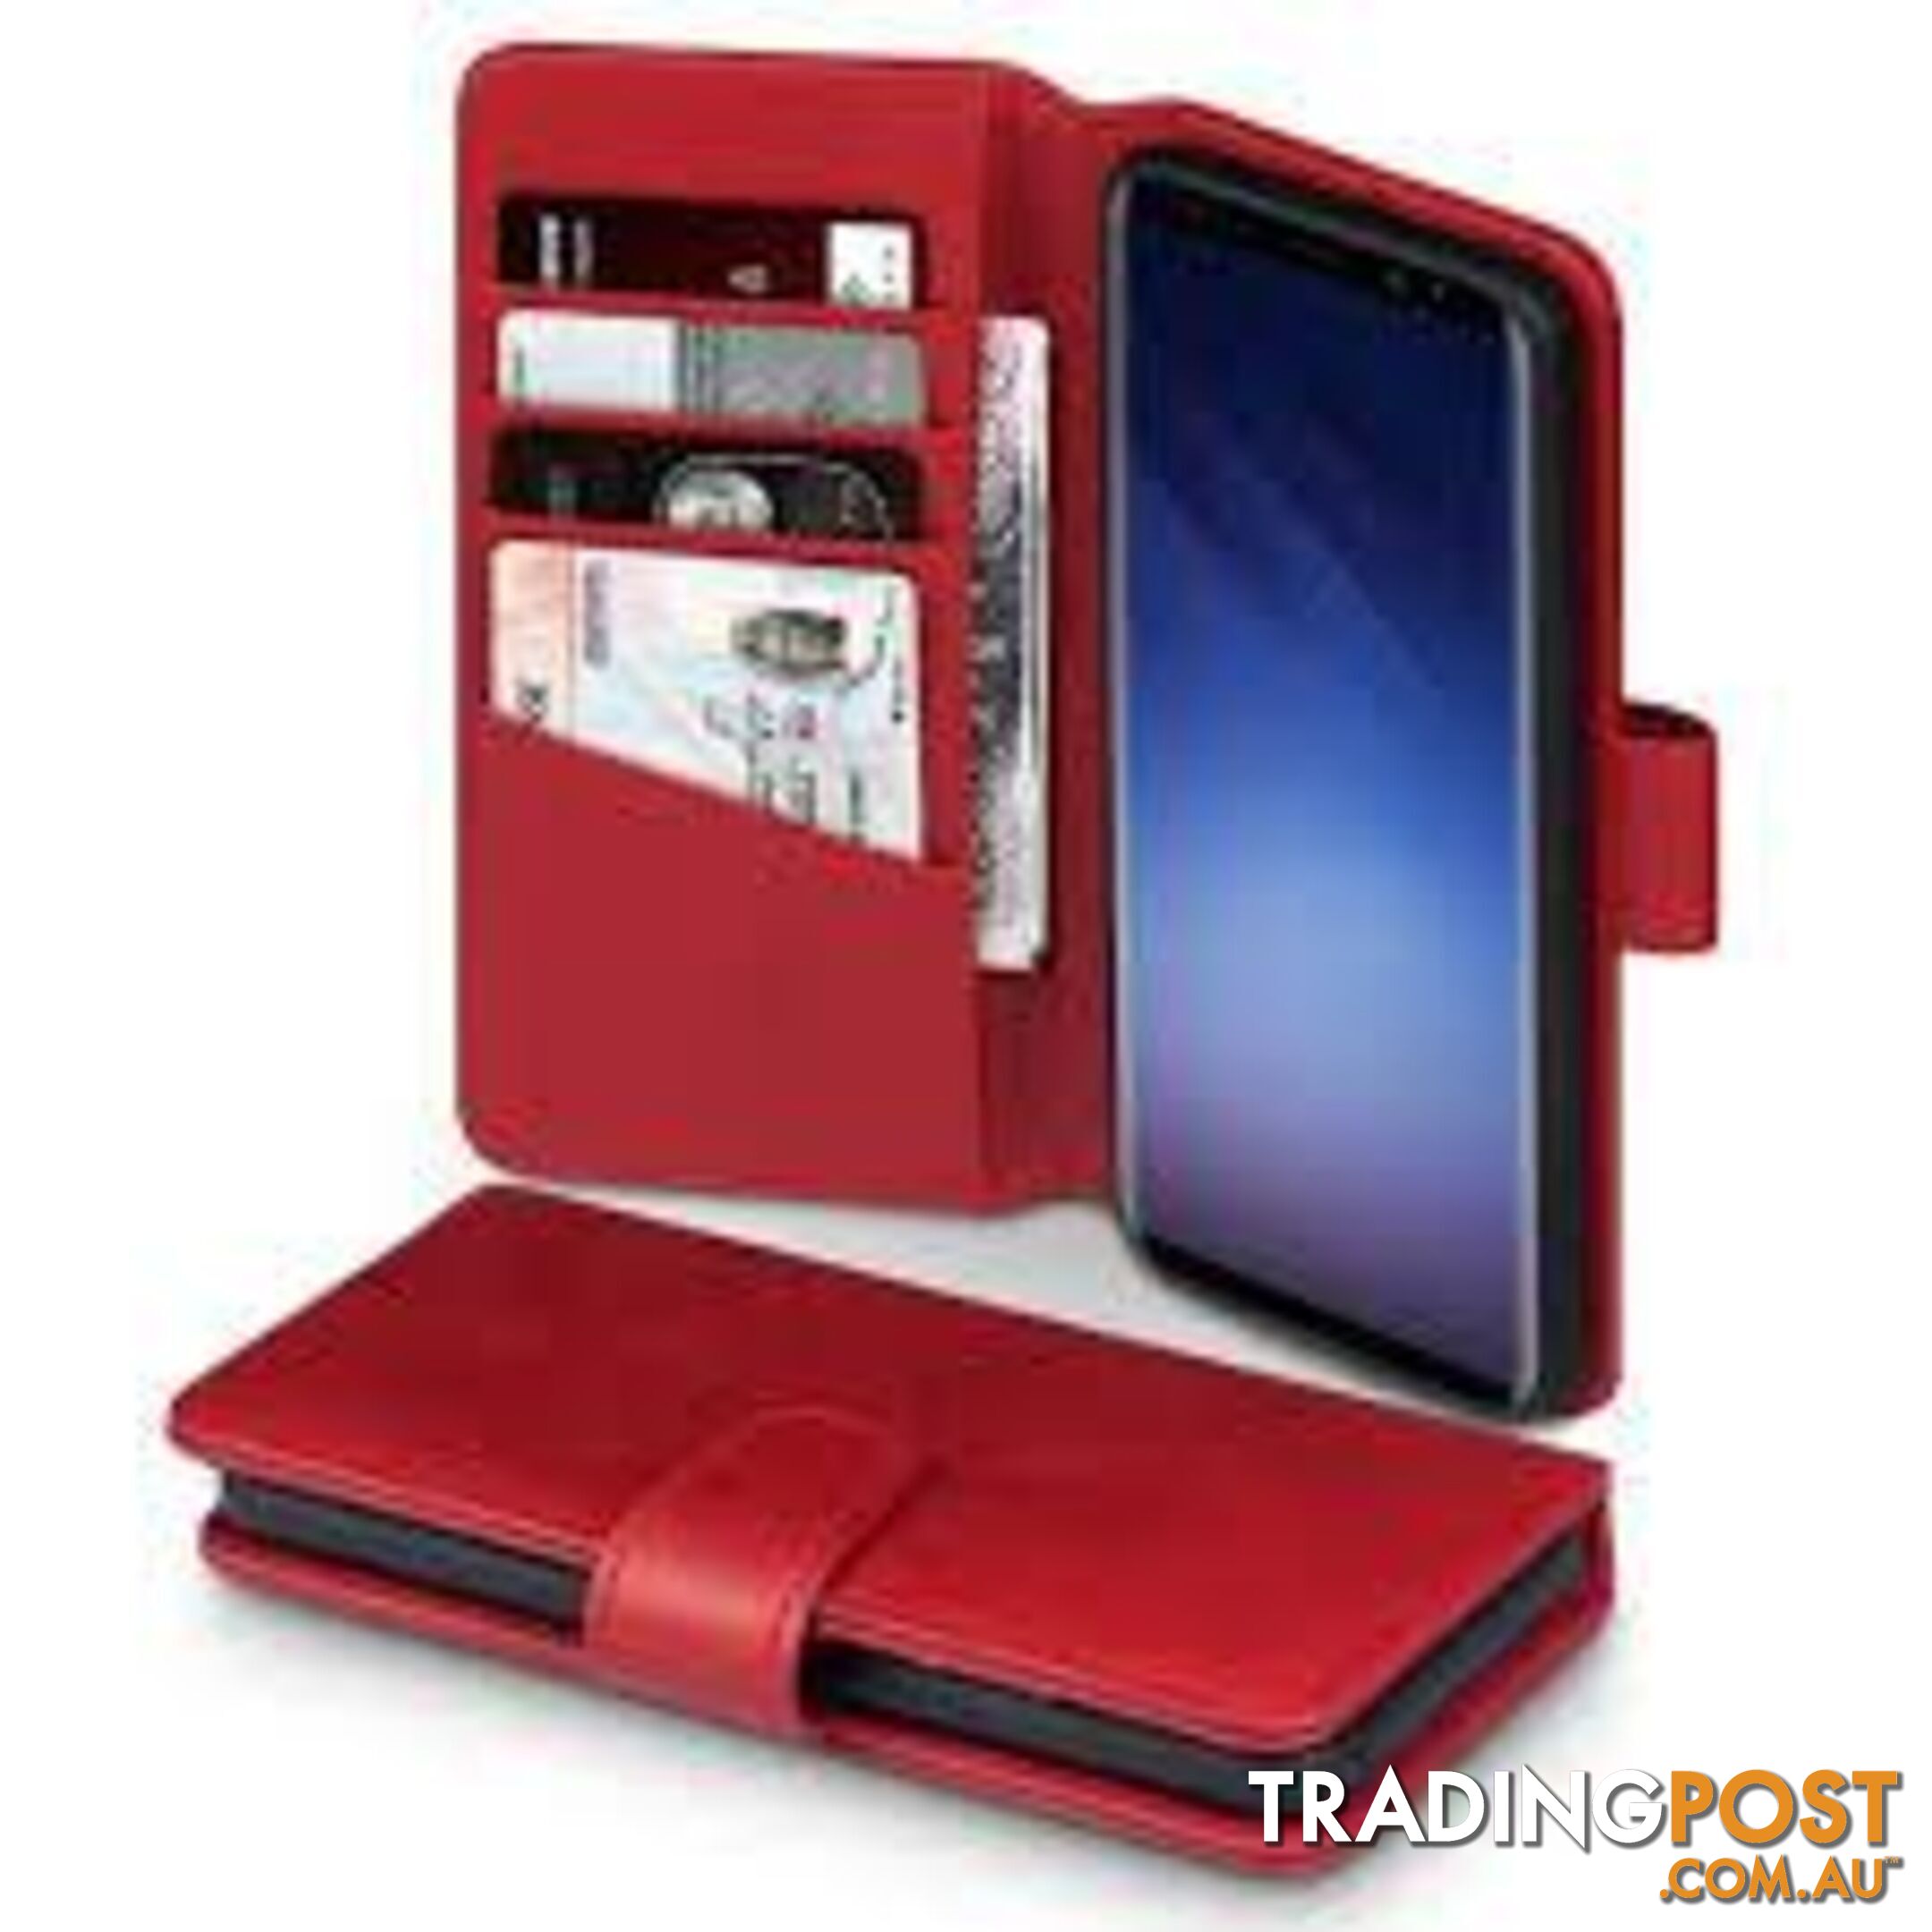 Samsung Galaxy S Series Wallet Style Case - 9FF275 - Cases